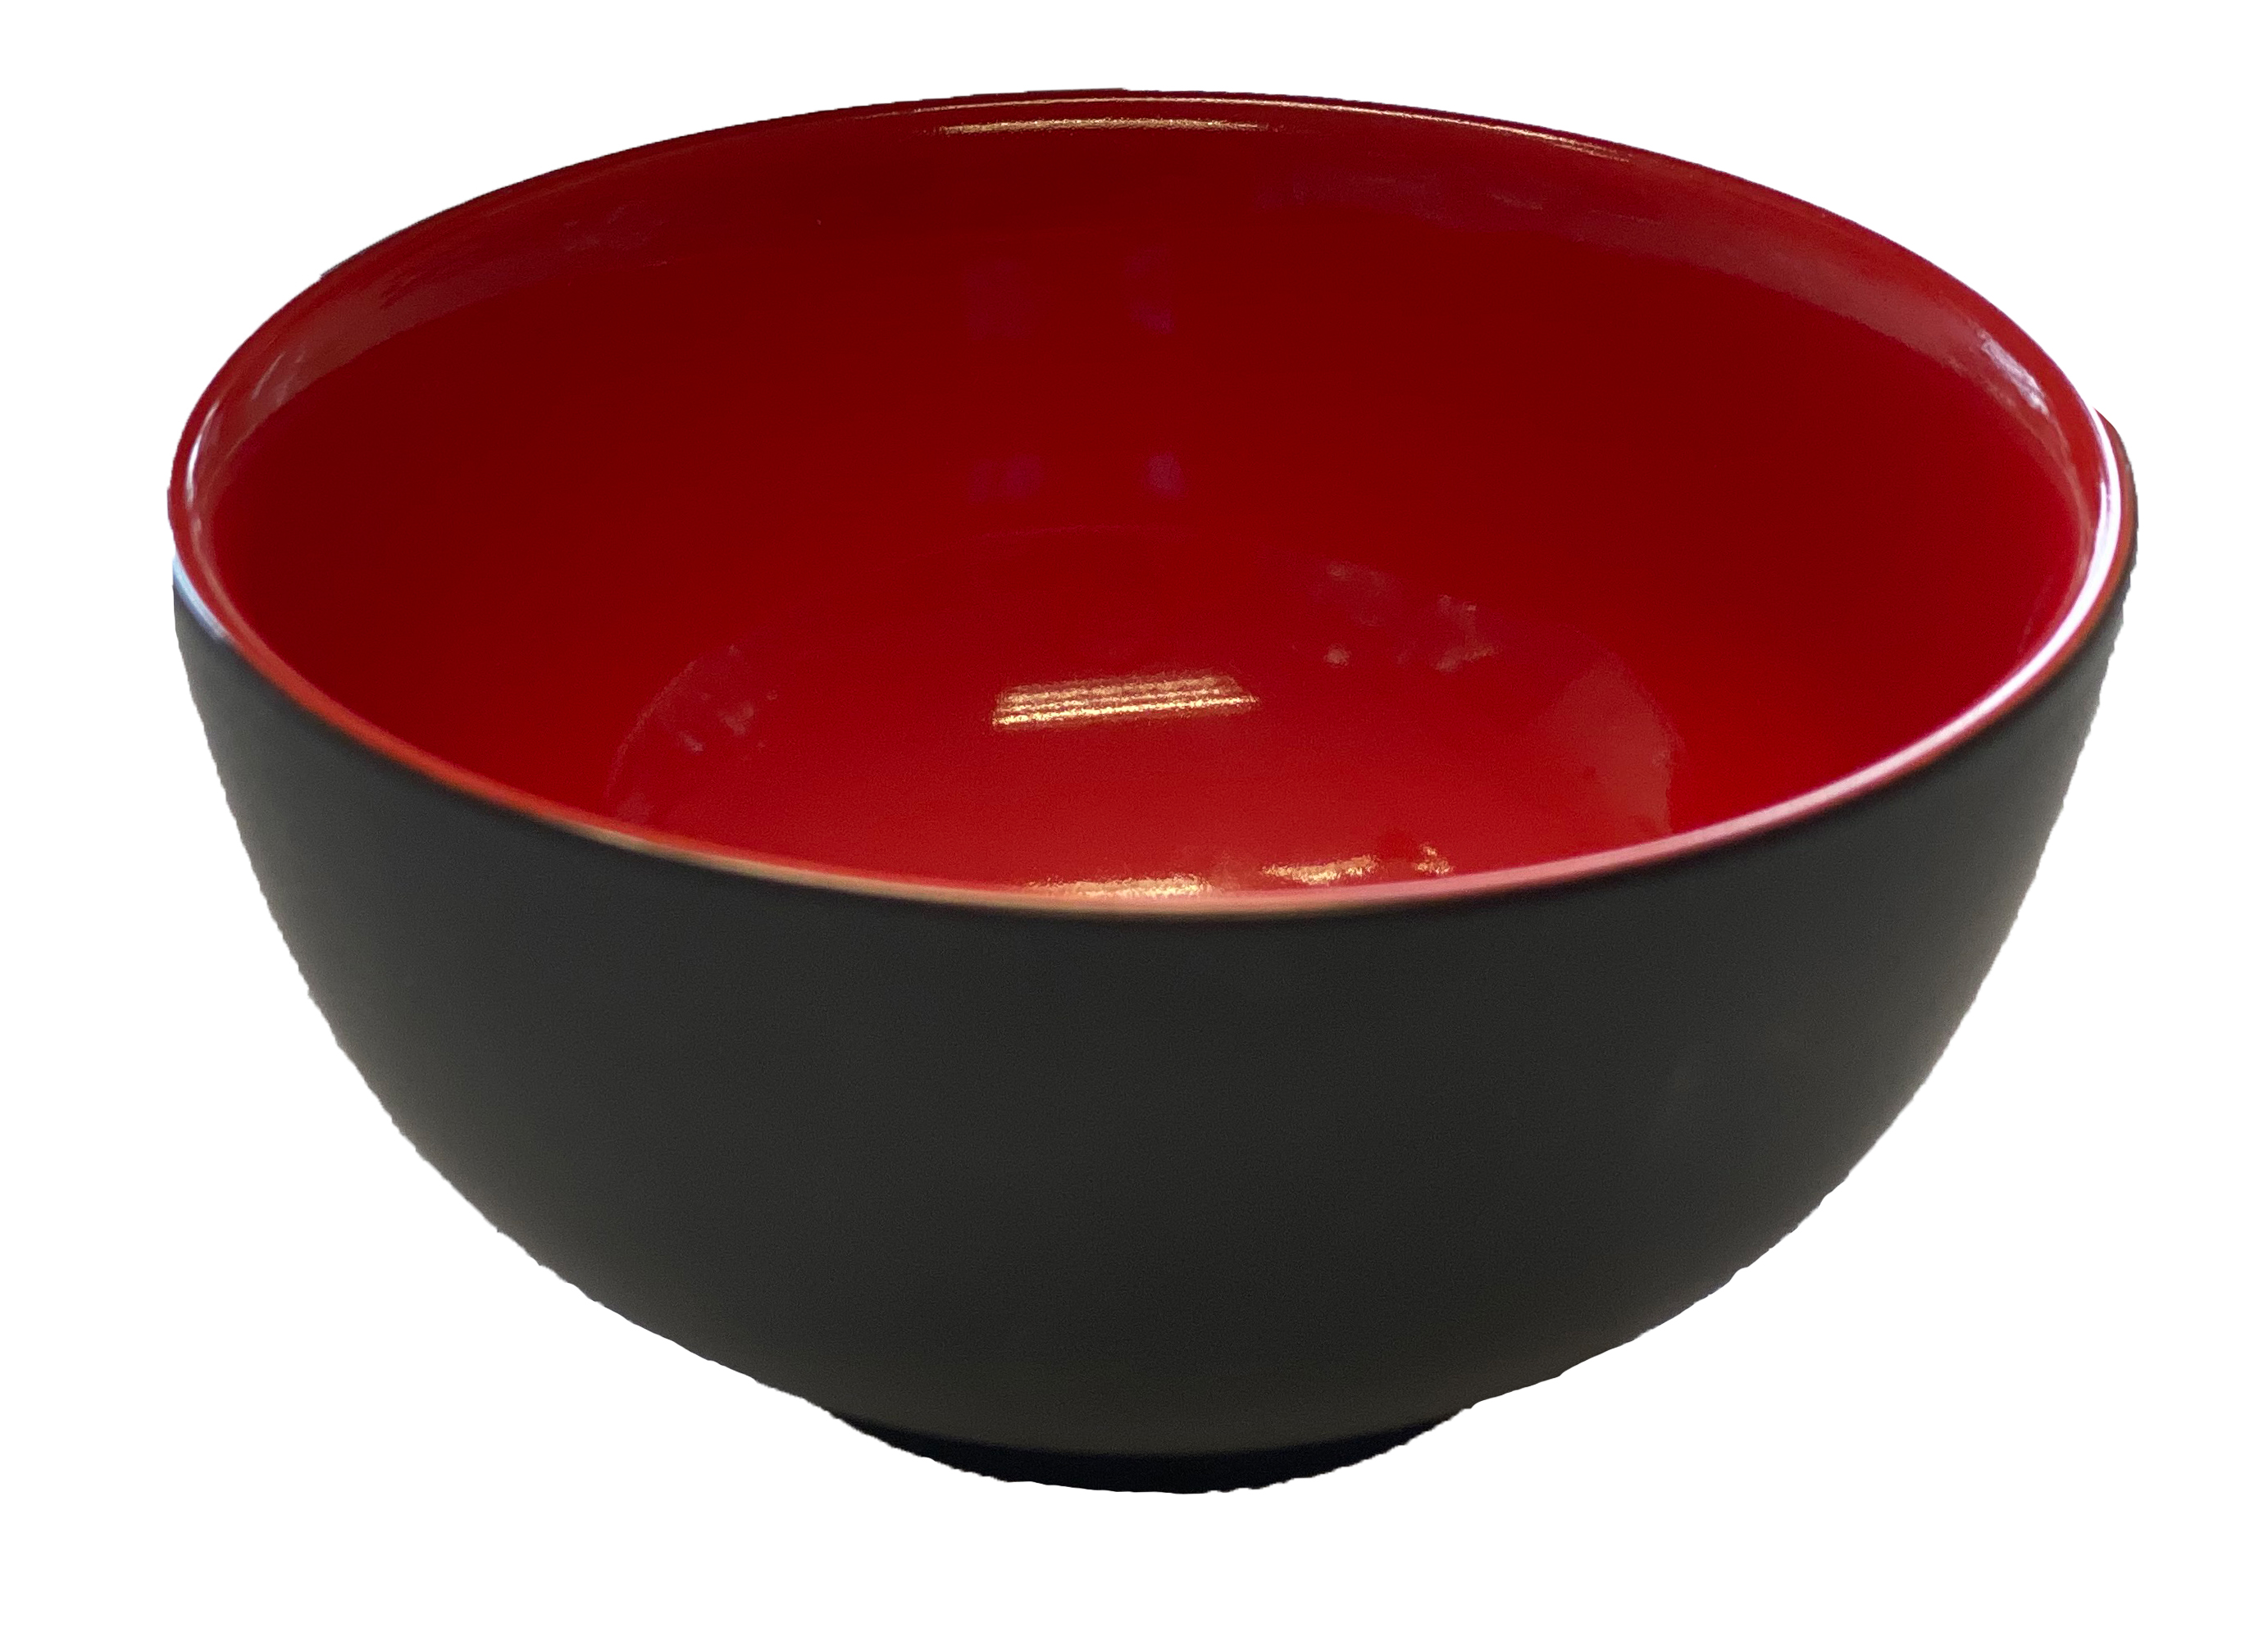 category_N9001 - Rice Bowl Black with Red inside 4.5